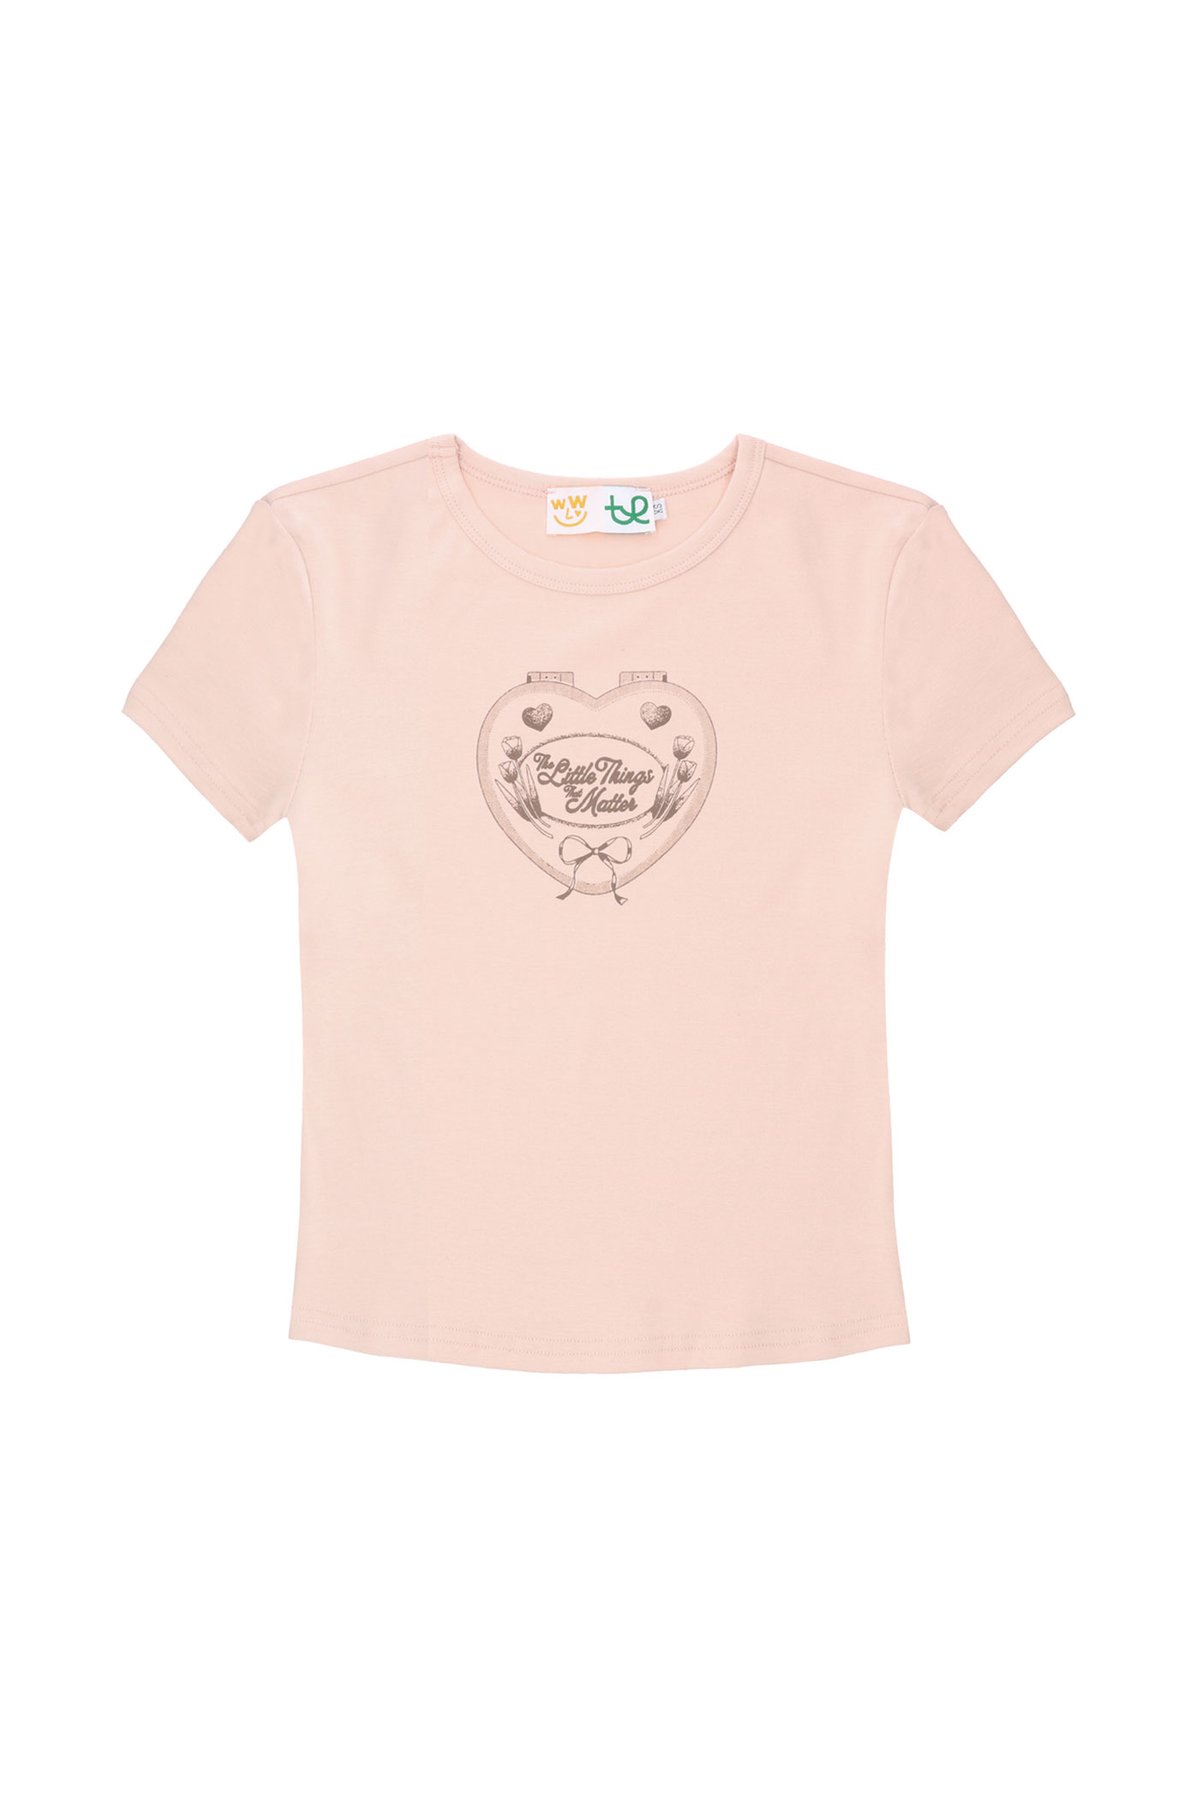 The Little Things That Matter Baby Tee (Baby Pink)